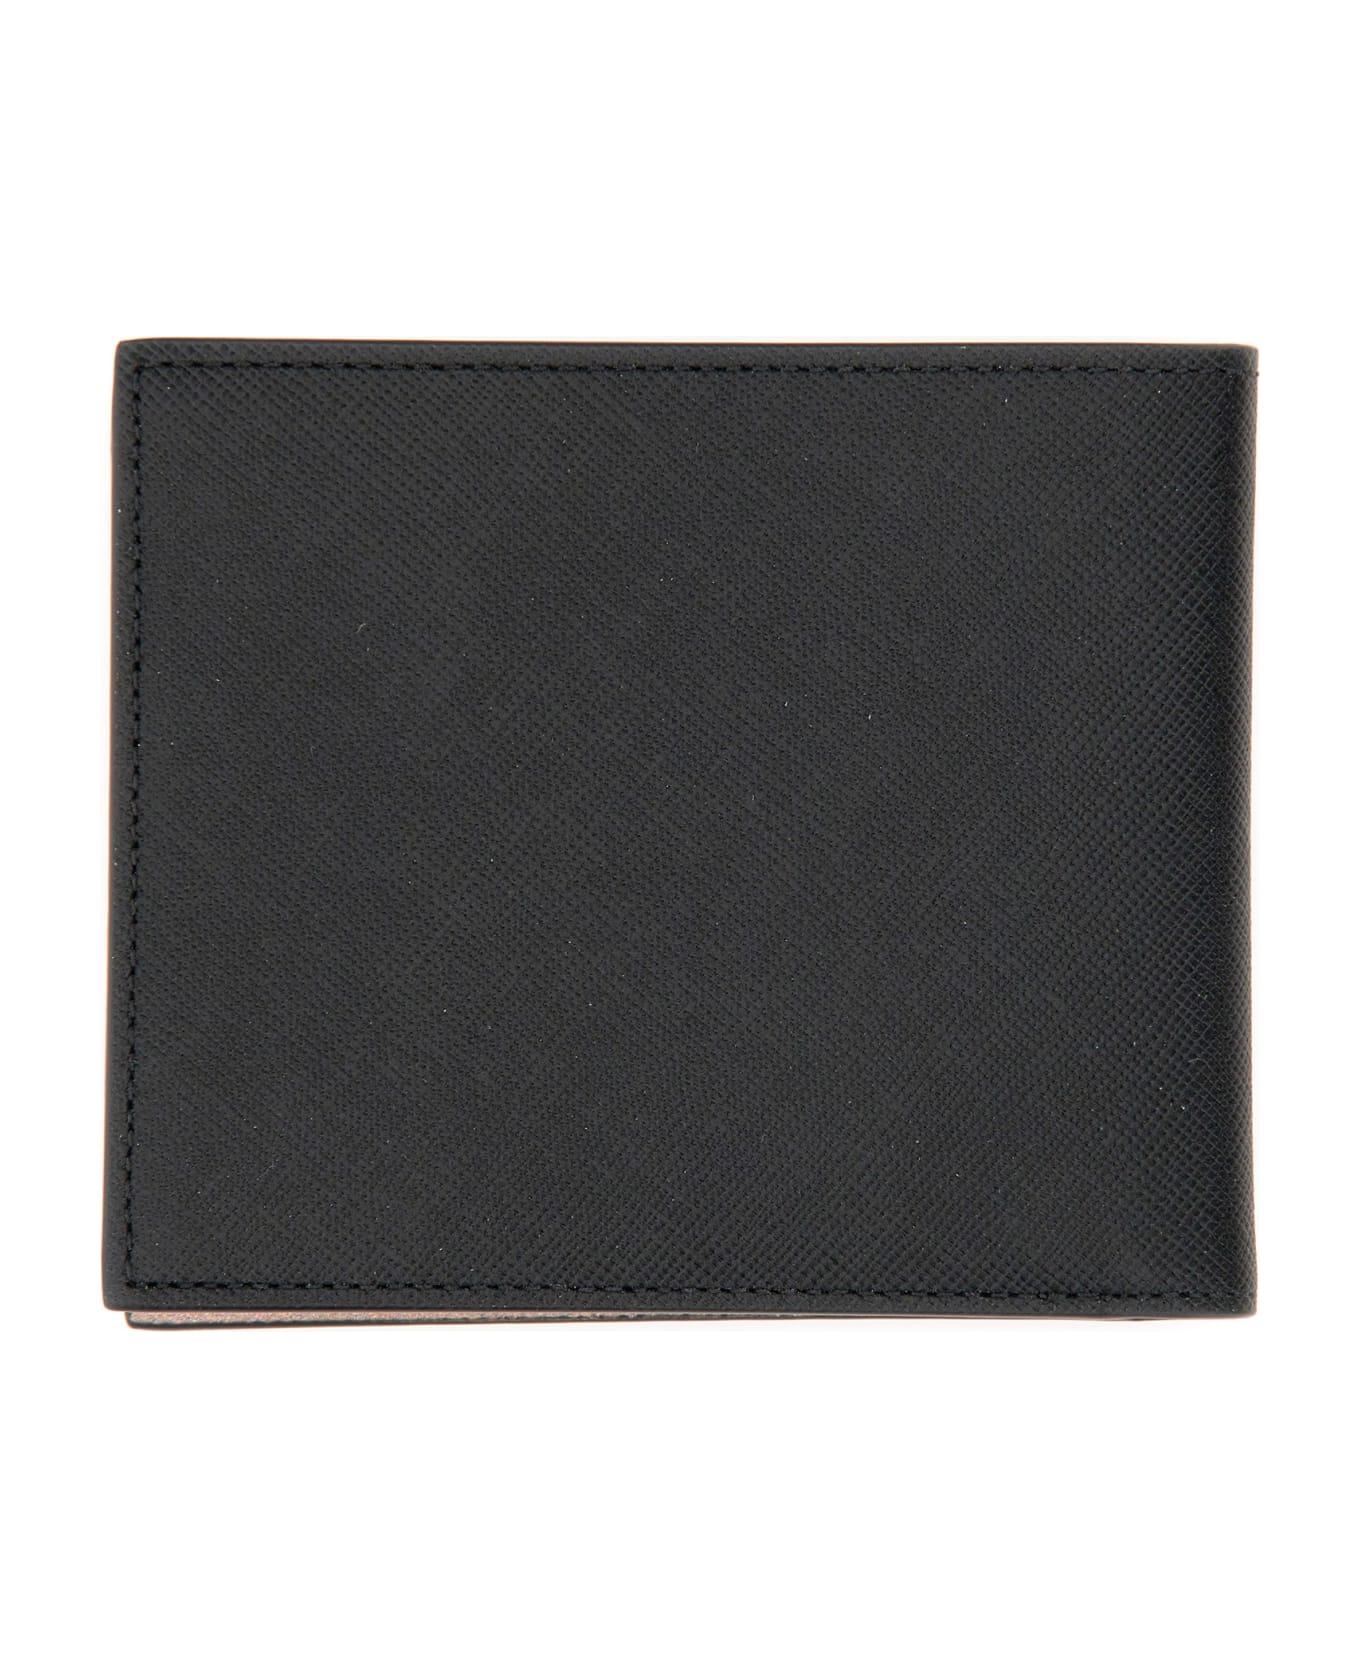 Paul Smith Leather Wallet - BLACK 財布